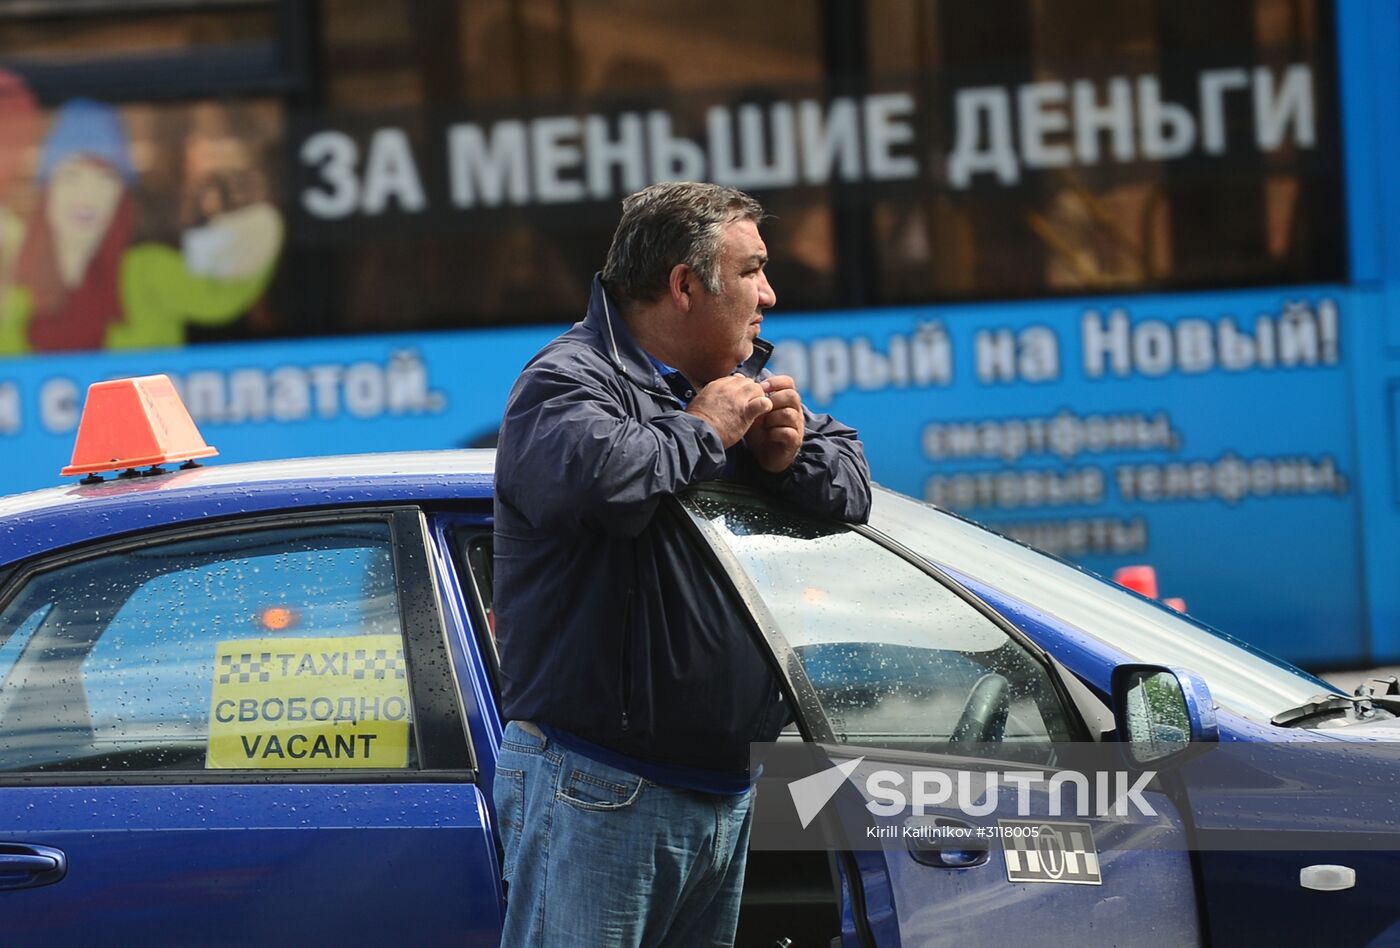 From June 1, drivers without Russian federation license are prohibited to work